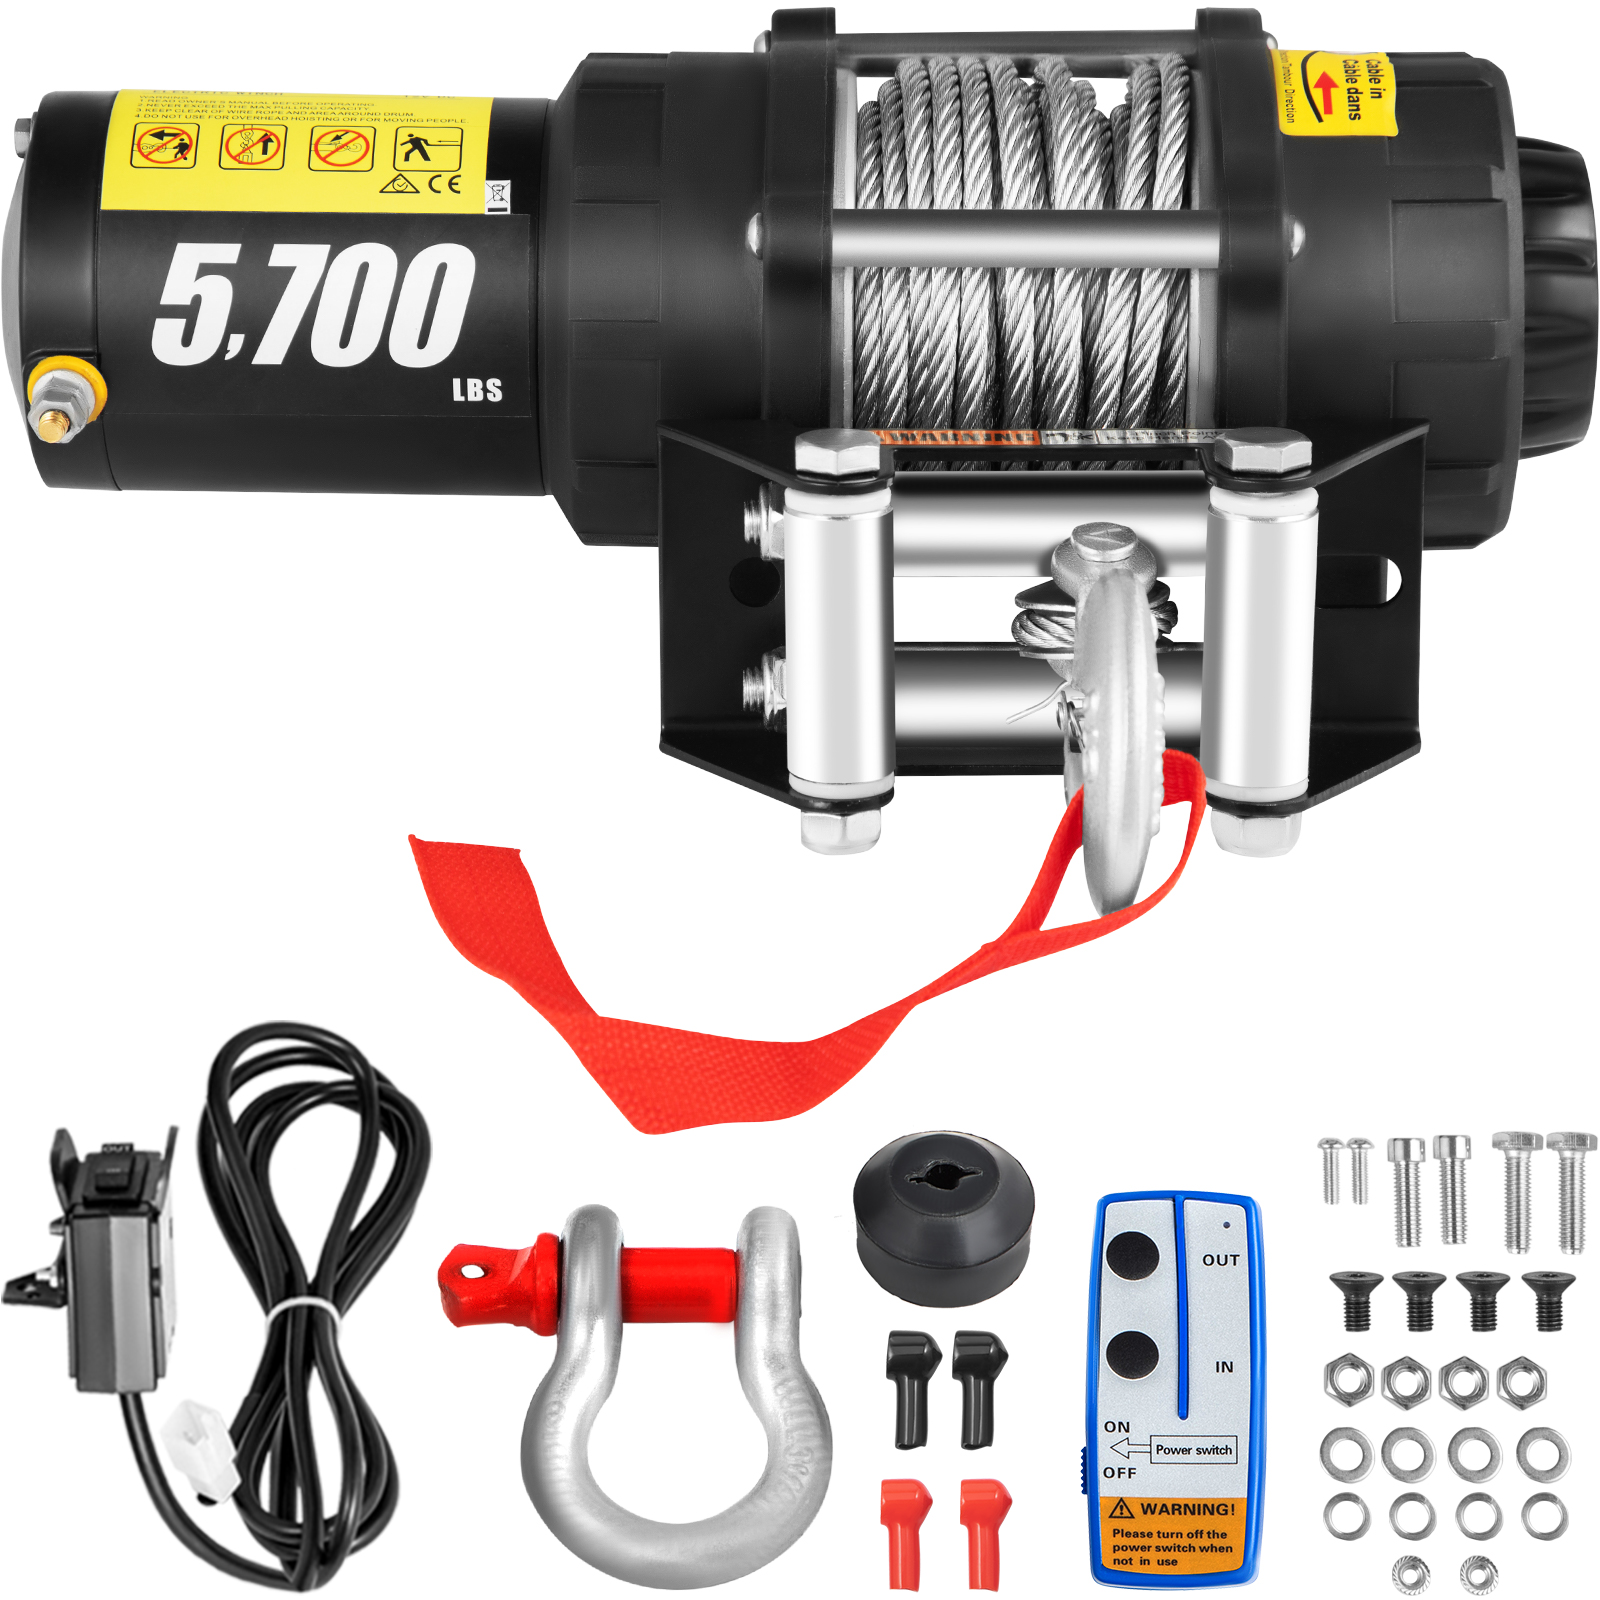 VEVOR Electric Winch Truck Winch 12V 5700 LBS Steel Cable for ATV/UTV Off Road от Vevor Many GEOs